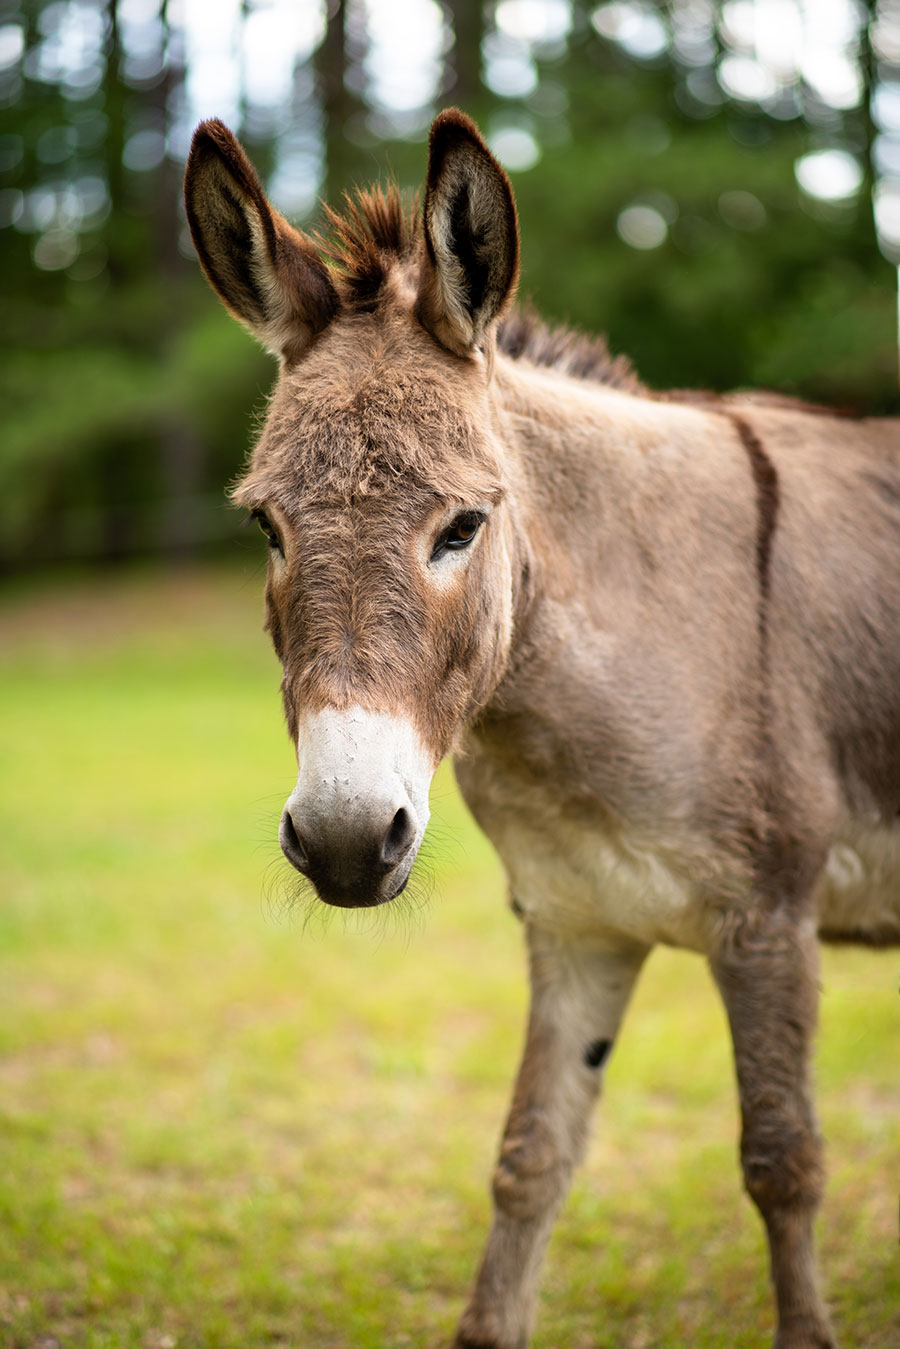 Photo of Mr. Ears, a donkey at Faith Equestrian Therapeutic Center